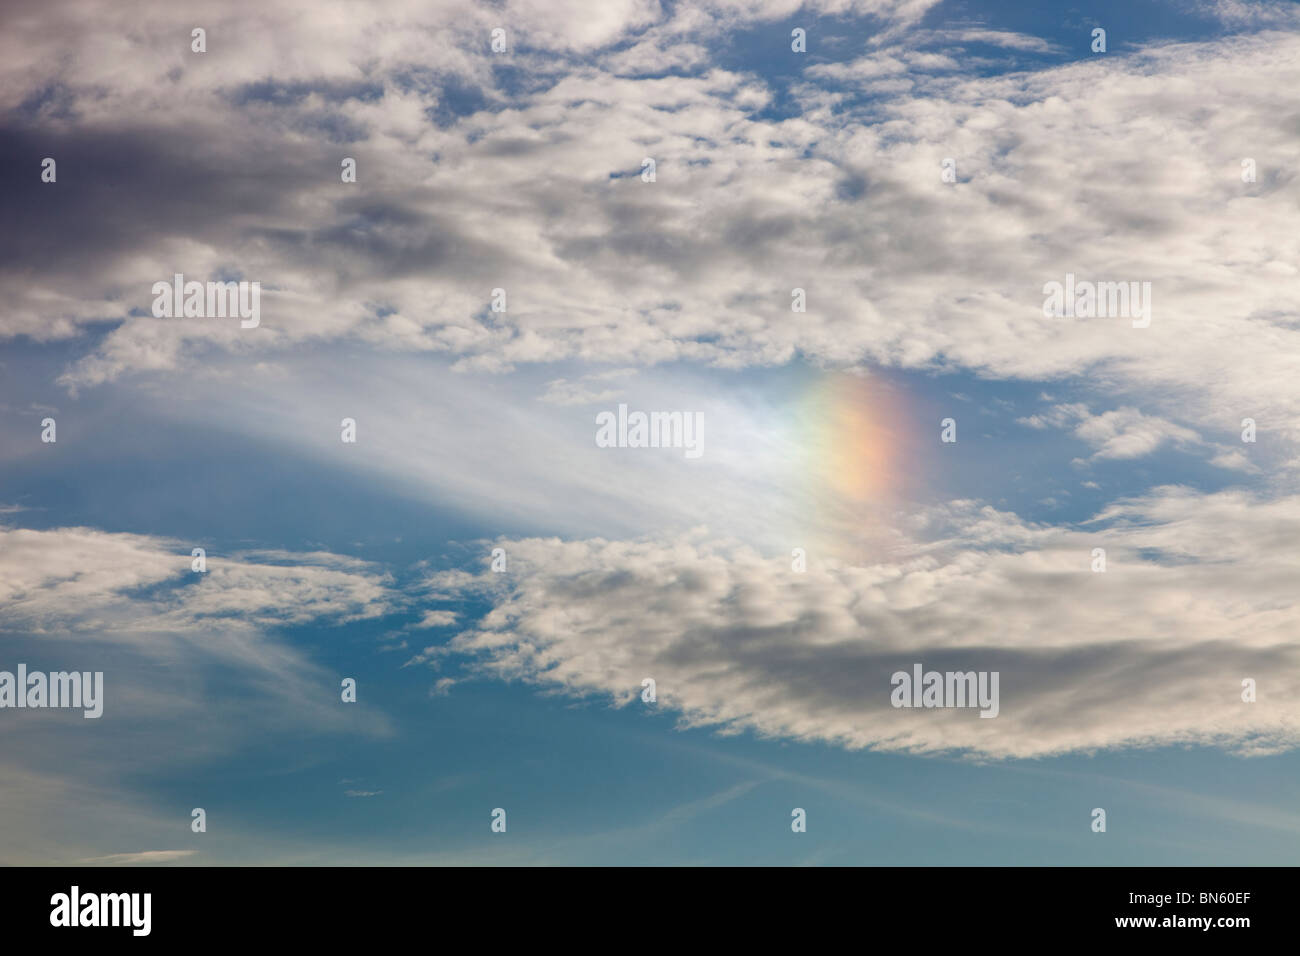 Sun dogs or Parhelion in high level clouds above Ambleside, UK, caused by light refracting off ice crystals. Stock Photo